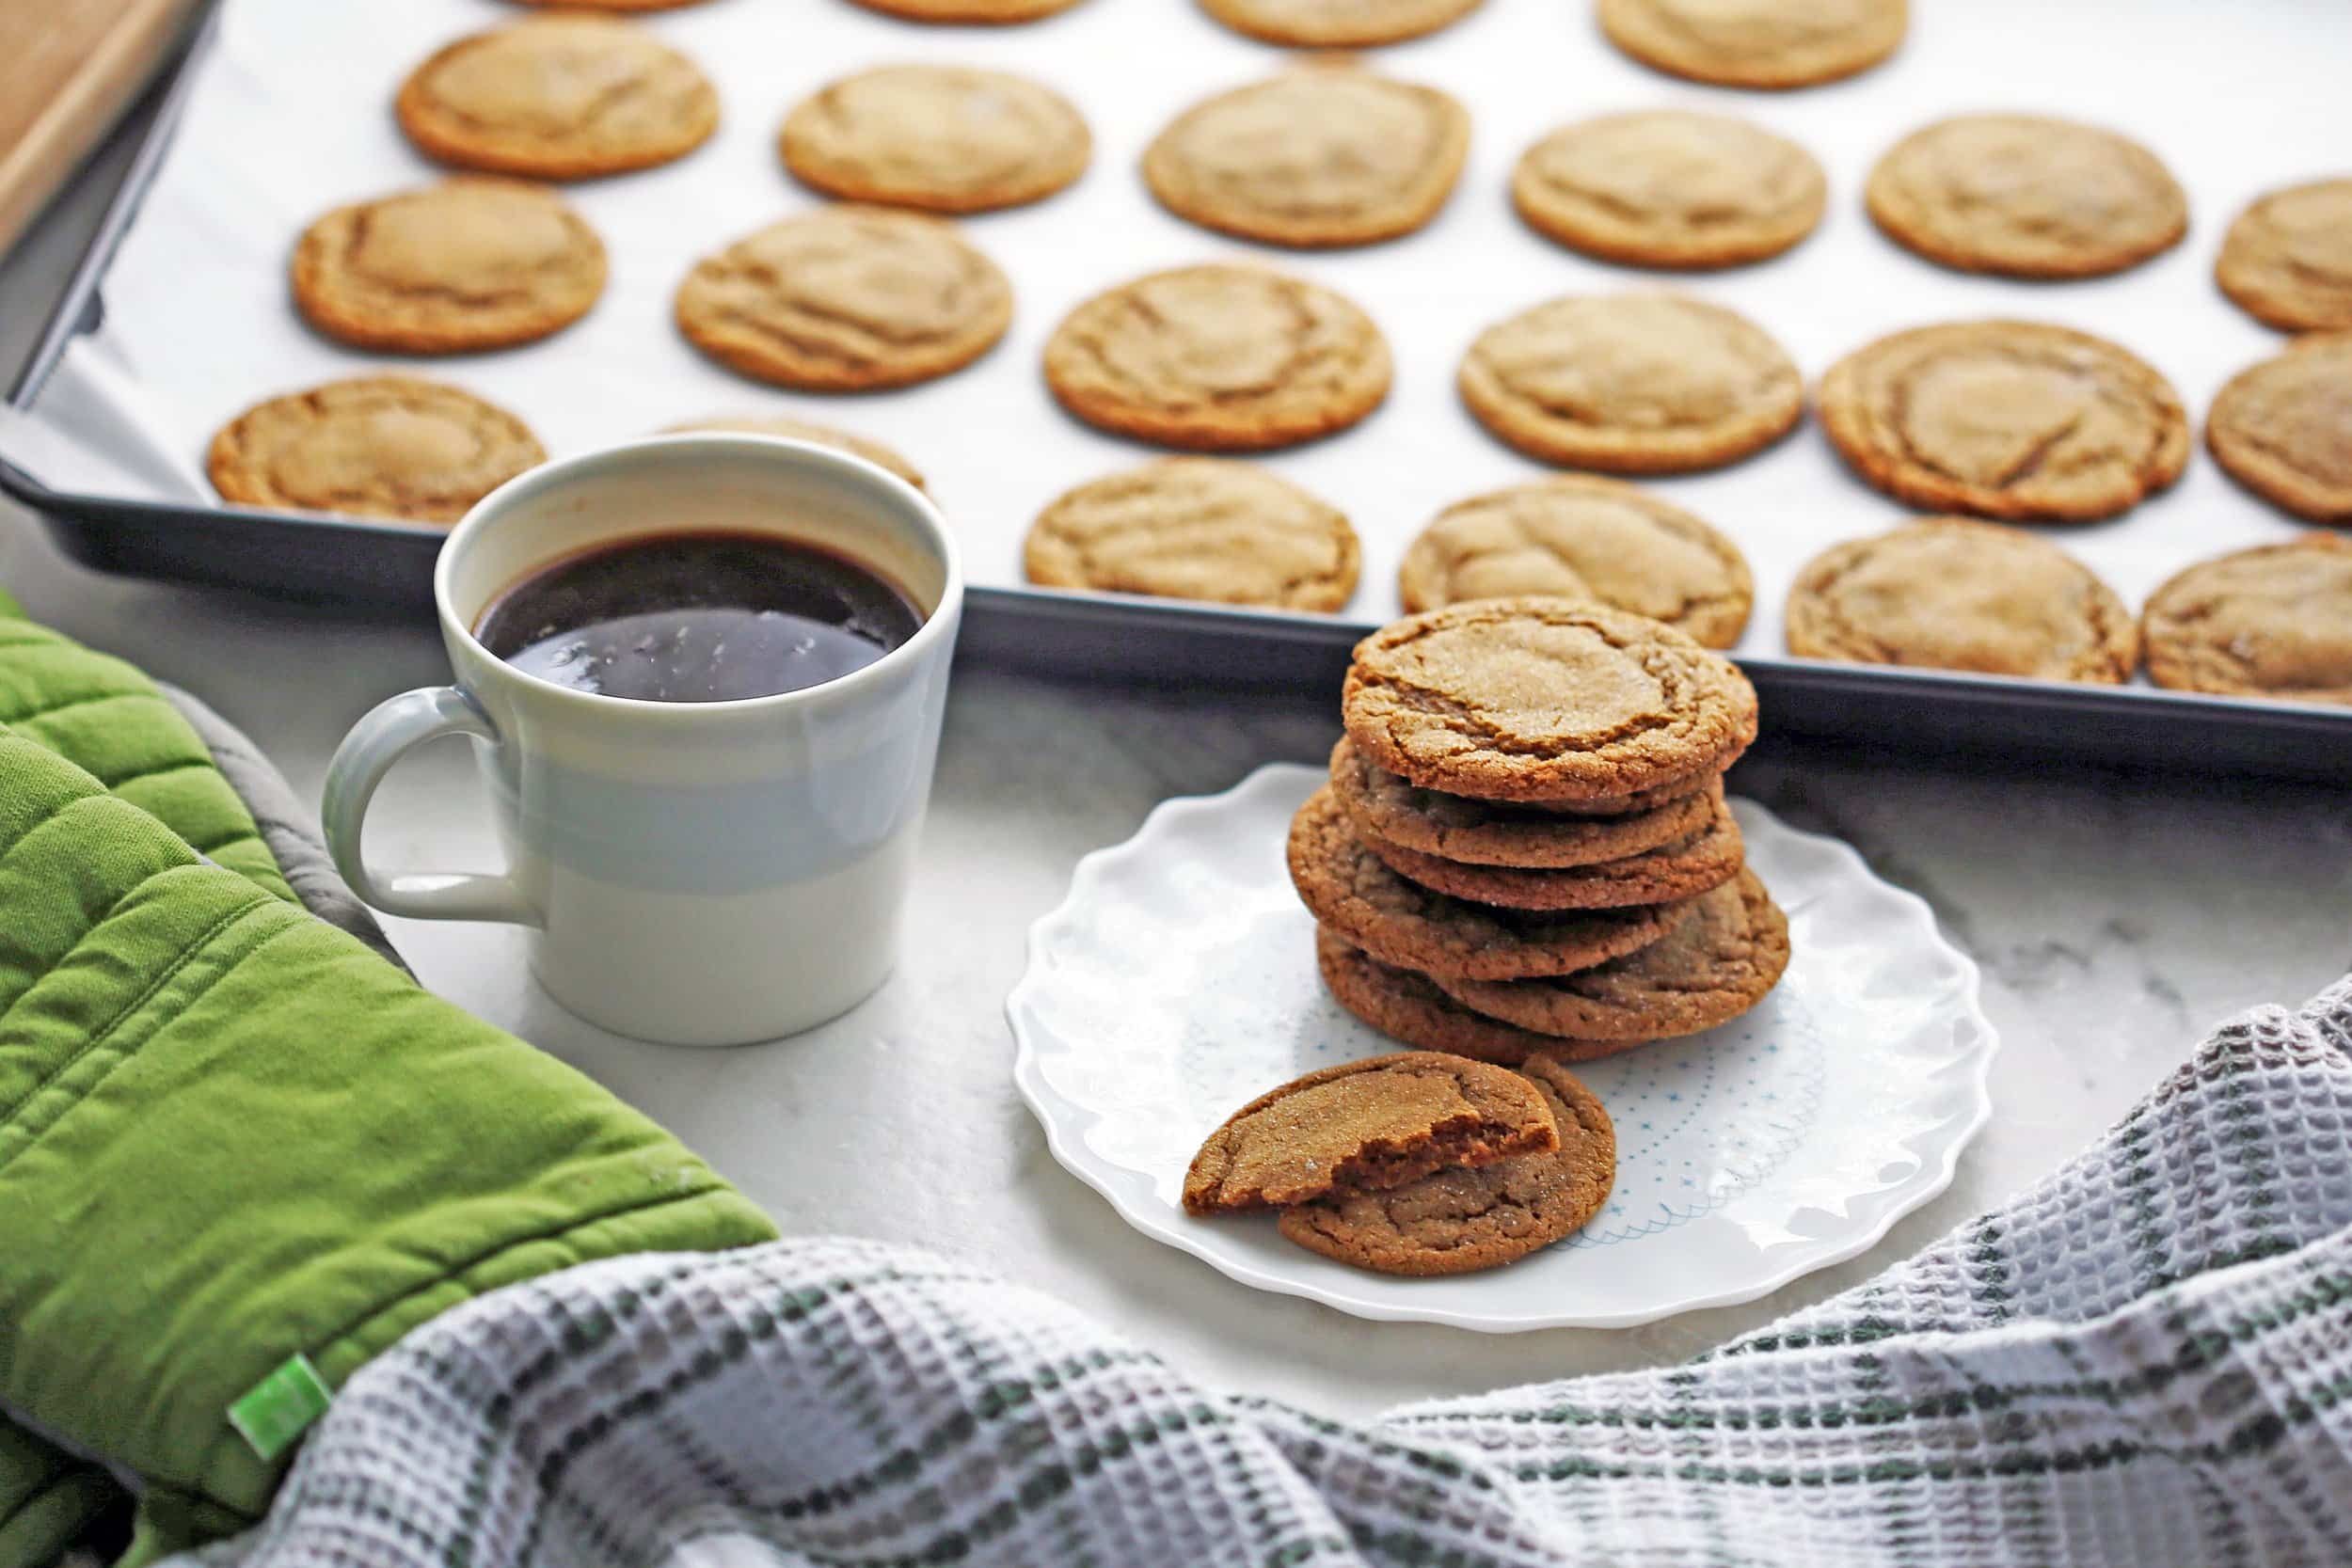 A side view of a plate of chewy gingersnap cookies with a cup of coffee and cookies on a baking sheet in the background.